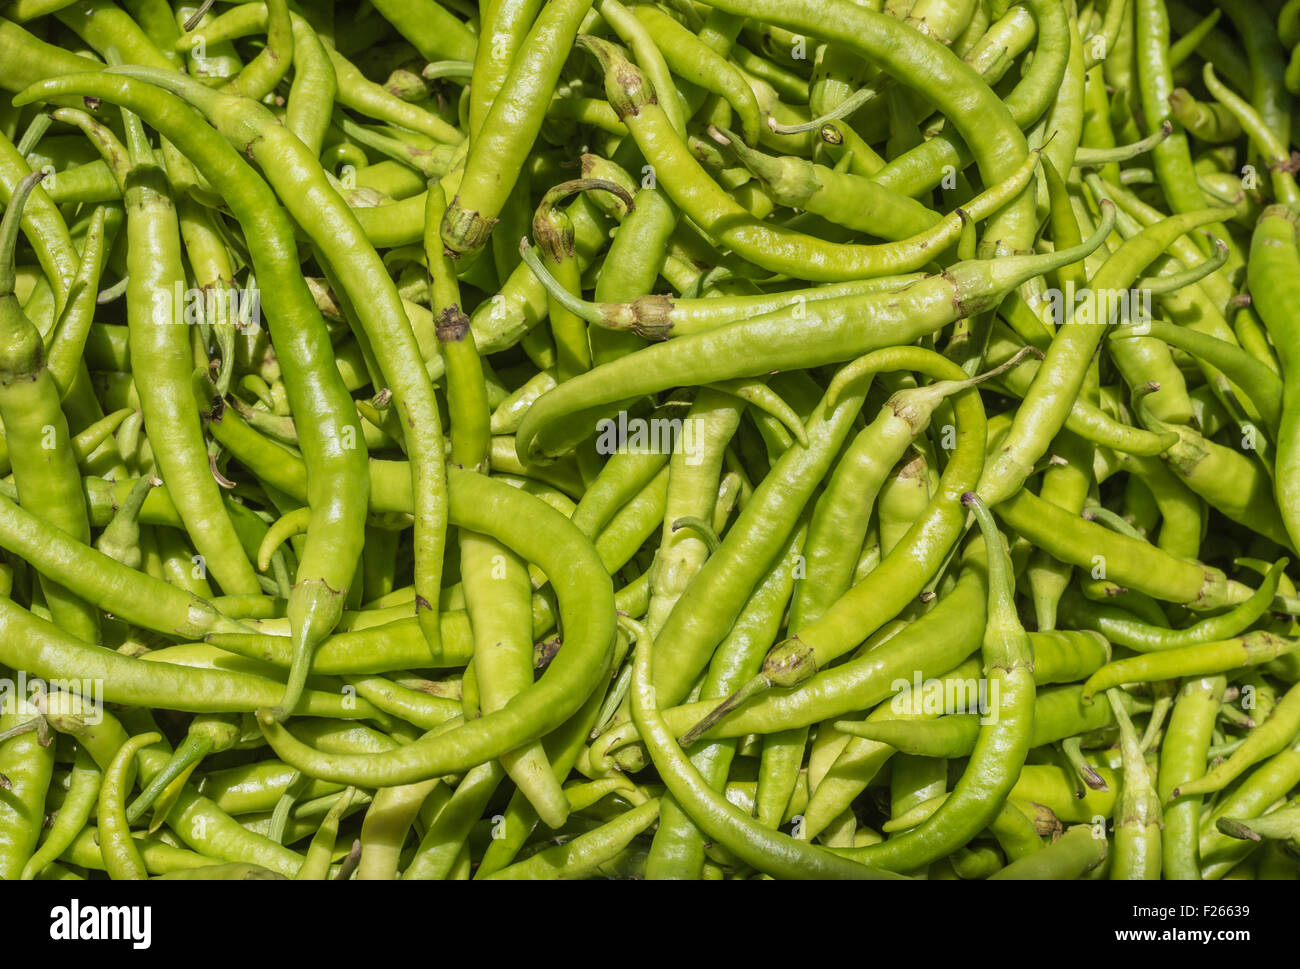 Stack of organic green peppers at the market Stock Photo